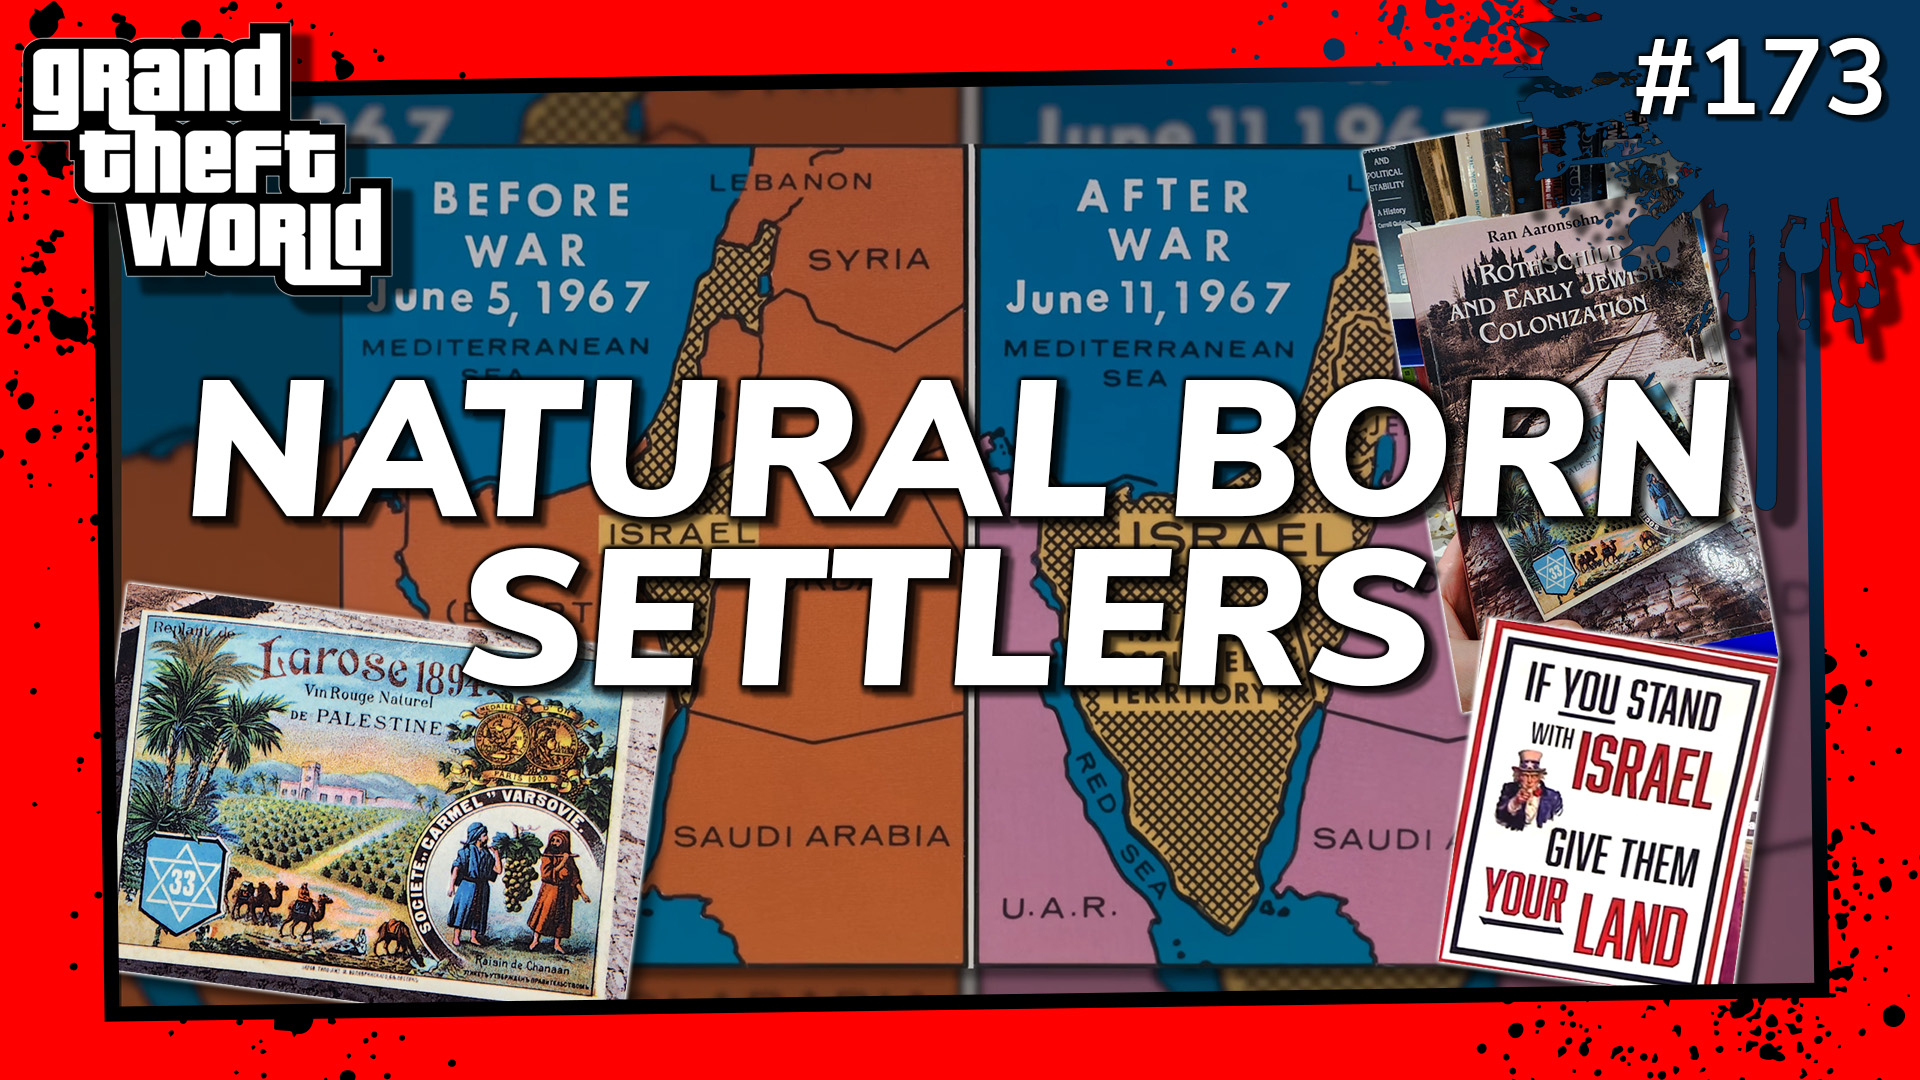 Grand Theft World Podcast 173 | NATURAL BORN SETTLERS